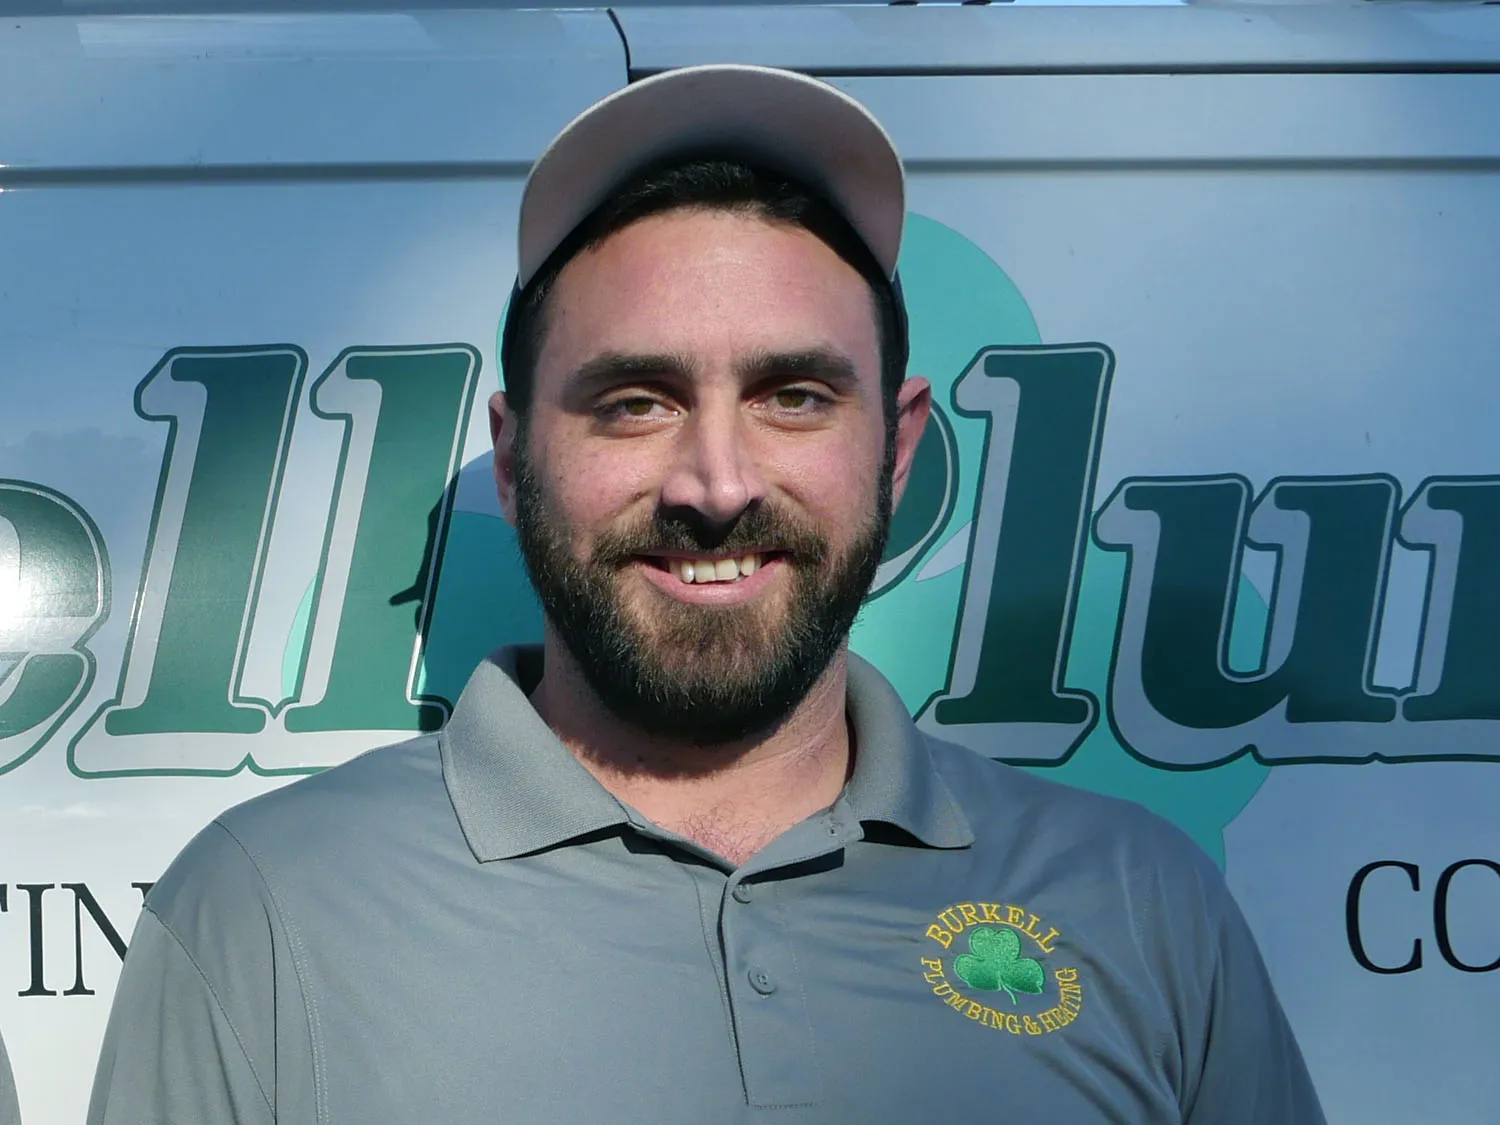 Jake Newman Jr. is HVAC Service Manager of Burkell Plumbing, Inc., a Diamond Certified company. He can be reached at (415) 690-7905 or by email.